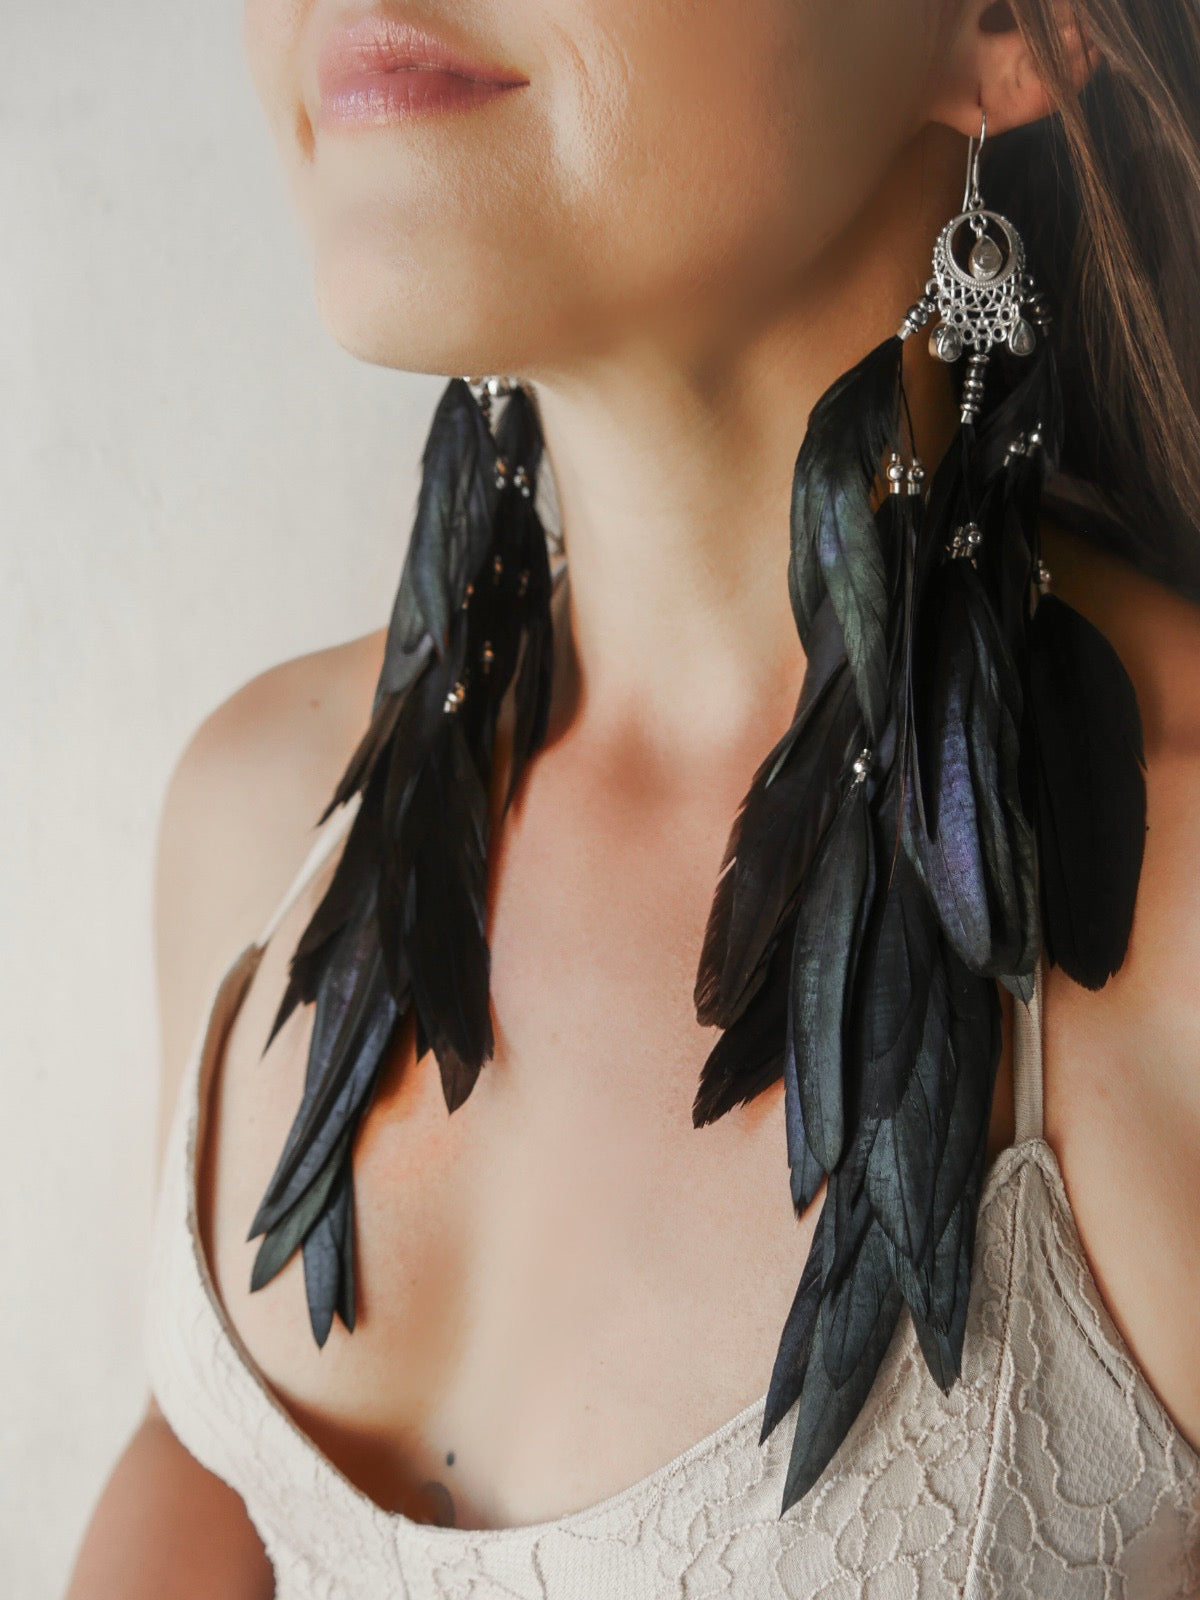 Bohemian Goddess long feather earrings named My intuition is my superpower with Labradorite crystals